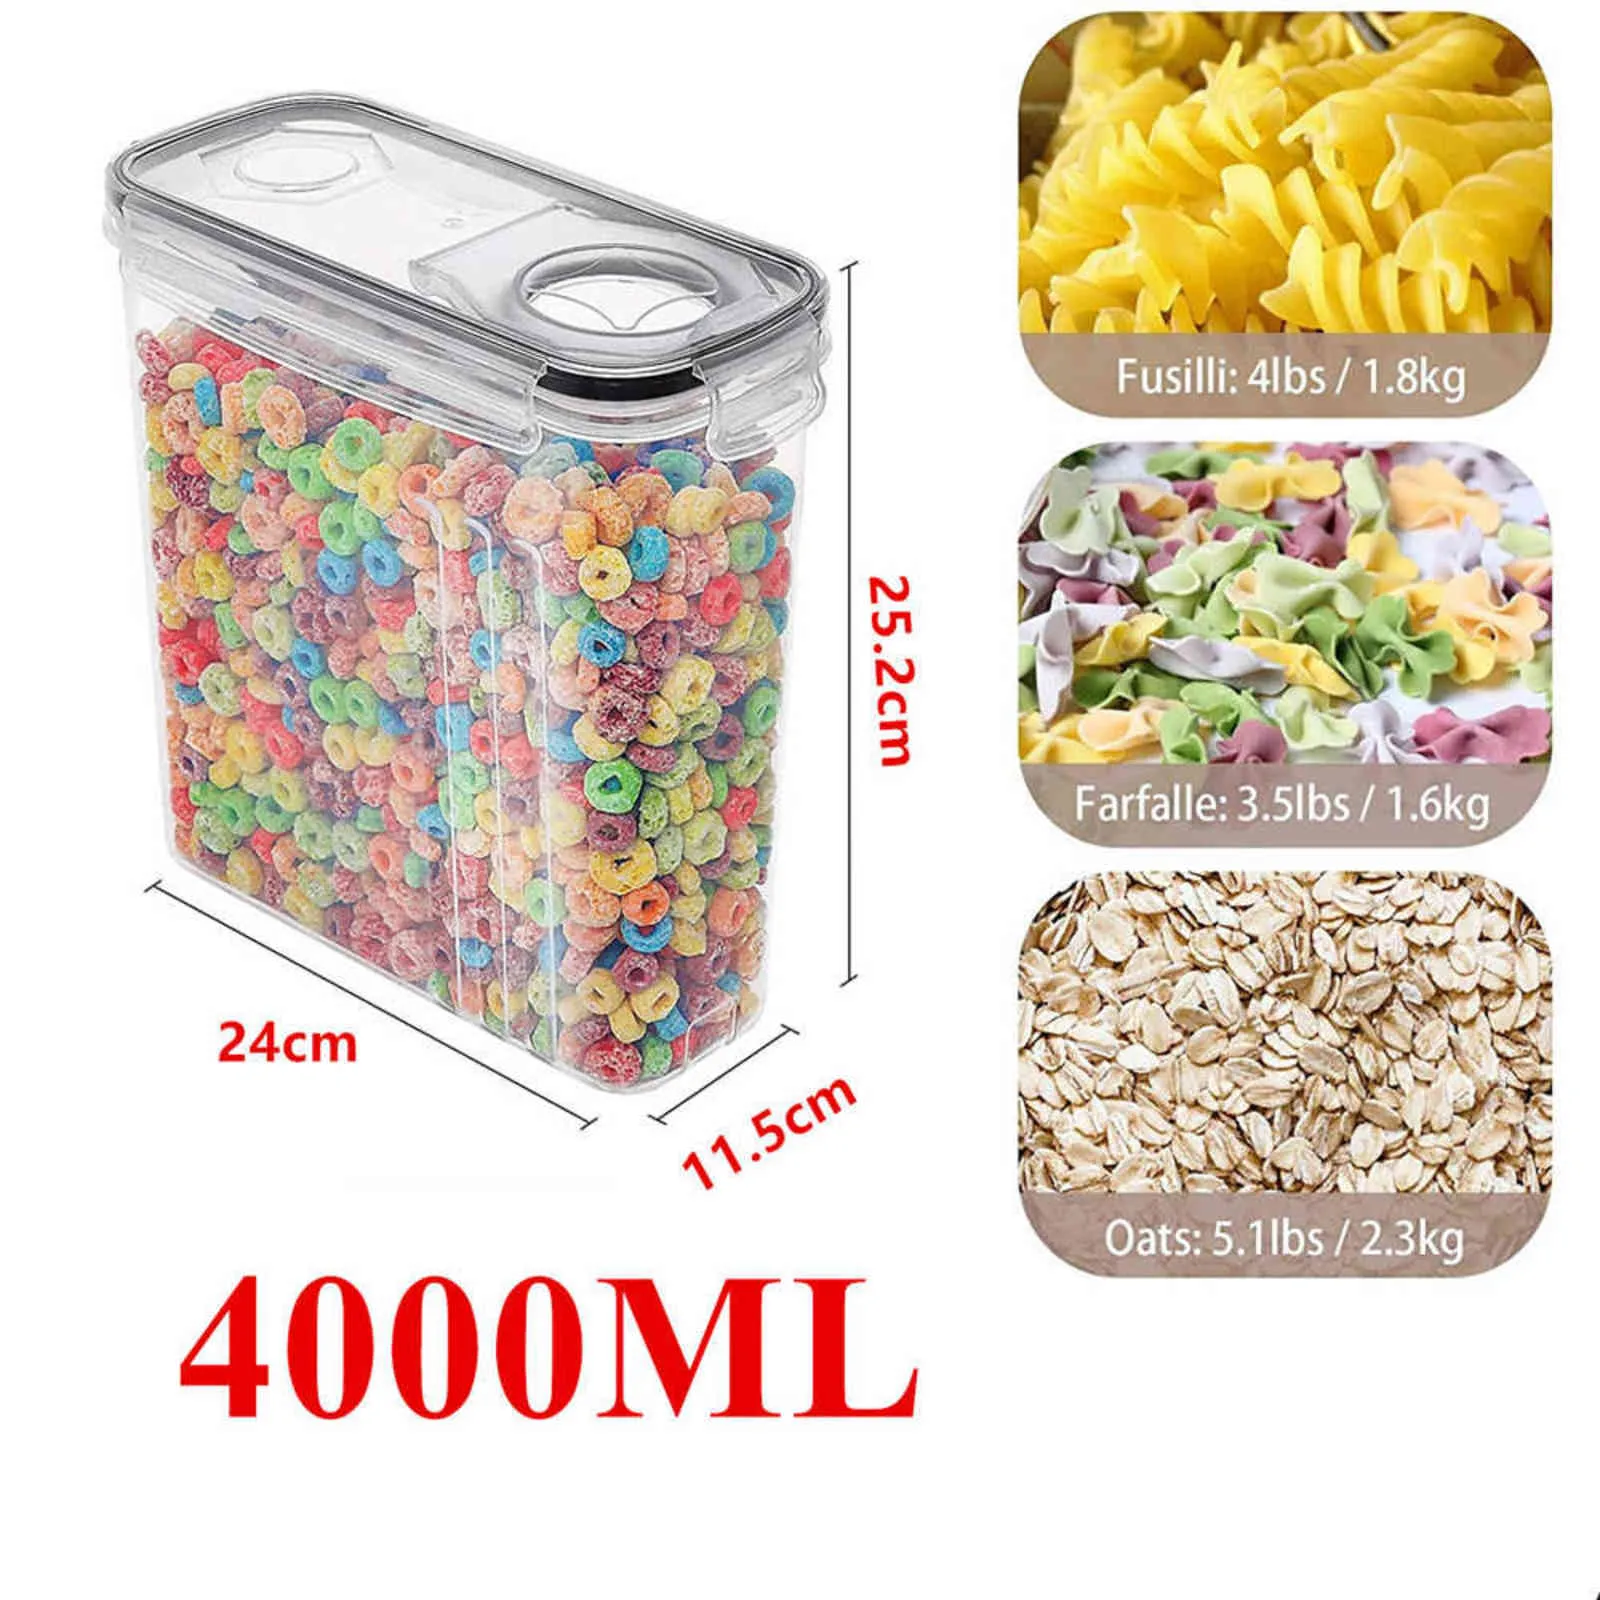 4L Cereal Containers Storage Set Dispenser Airtight BPA-Free Pantry Organization Canister for Sugar Flour Food can 211112